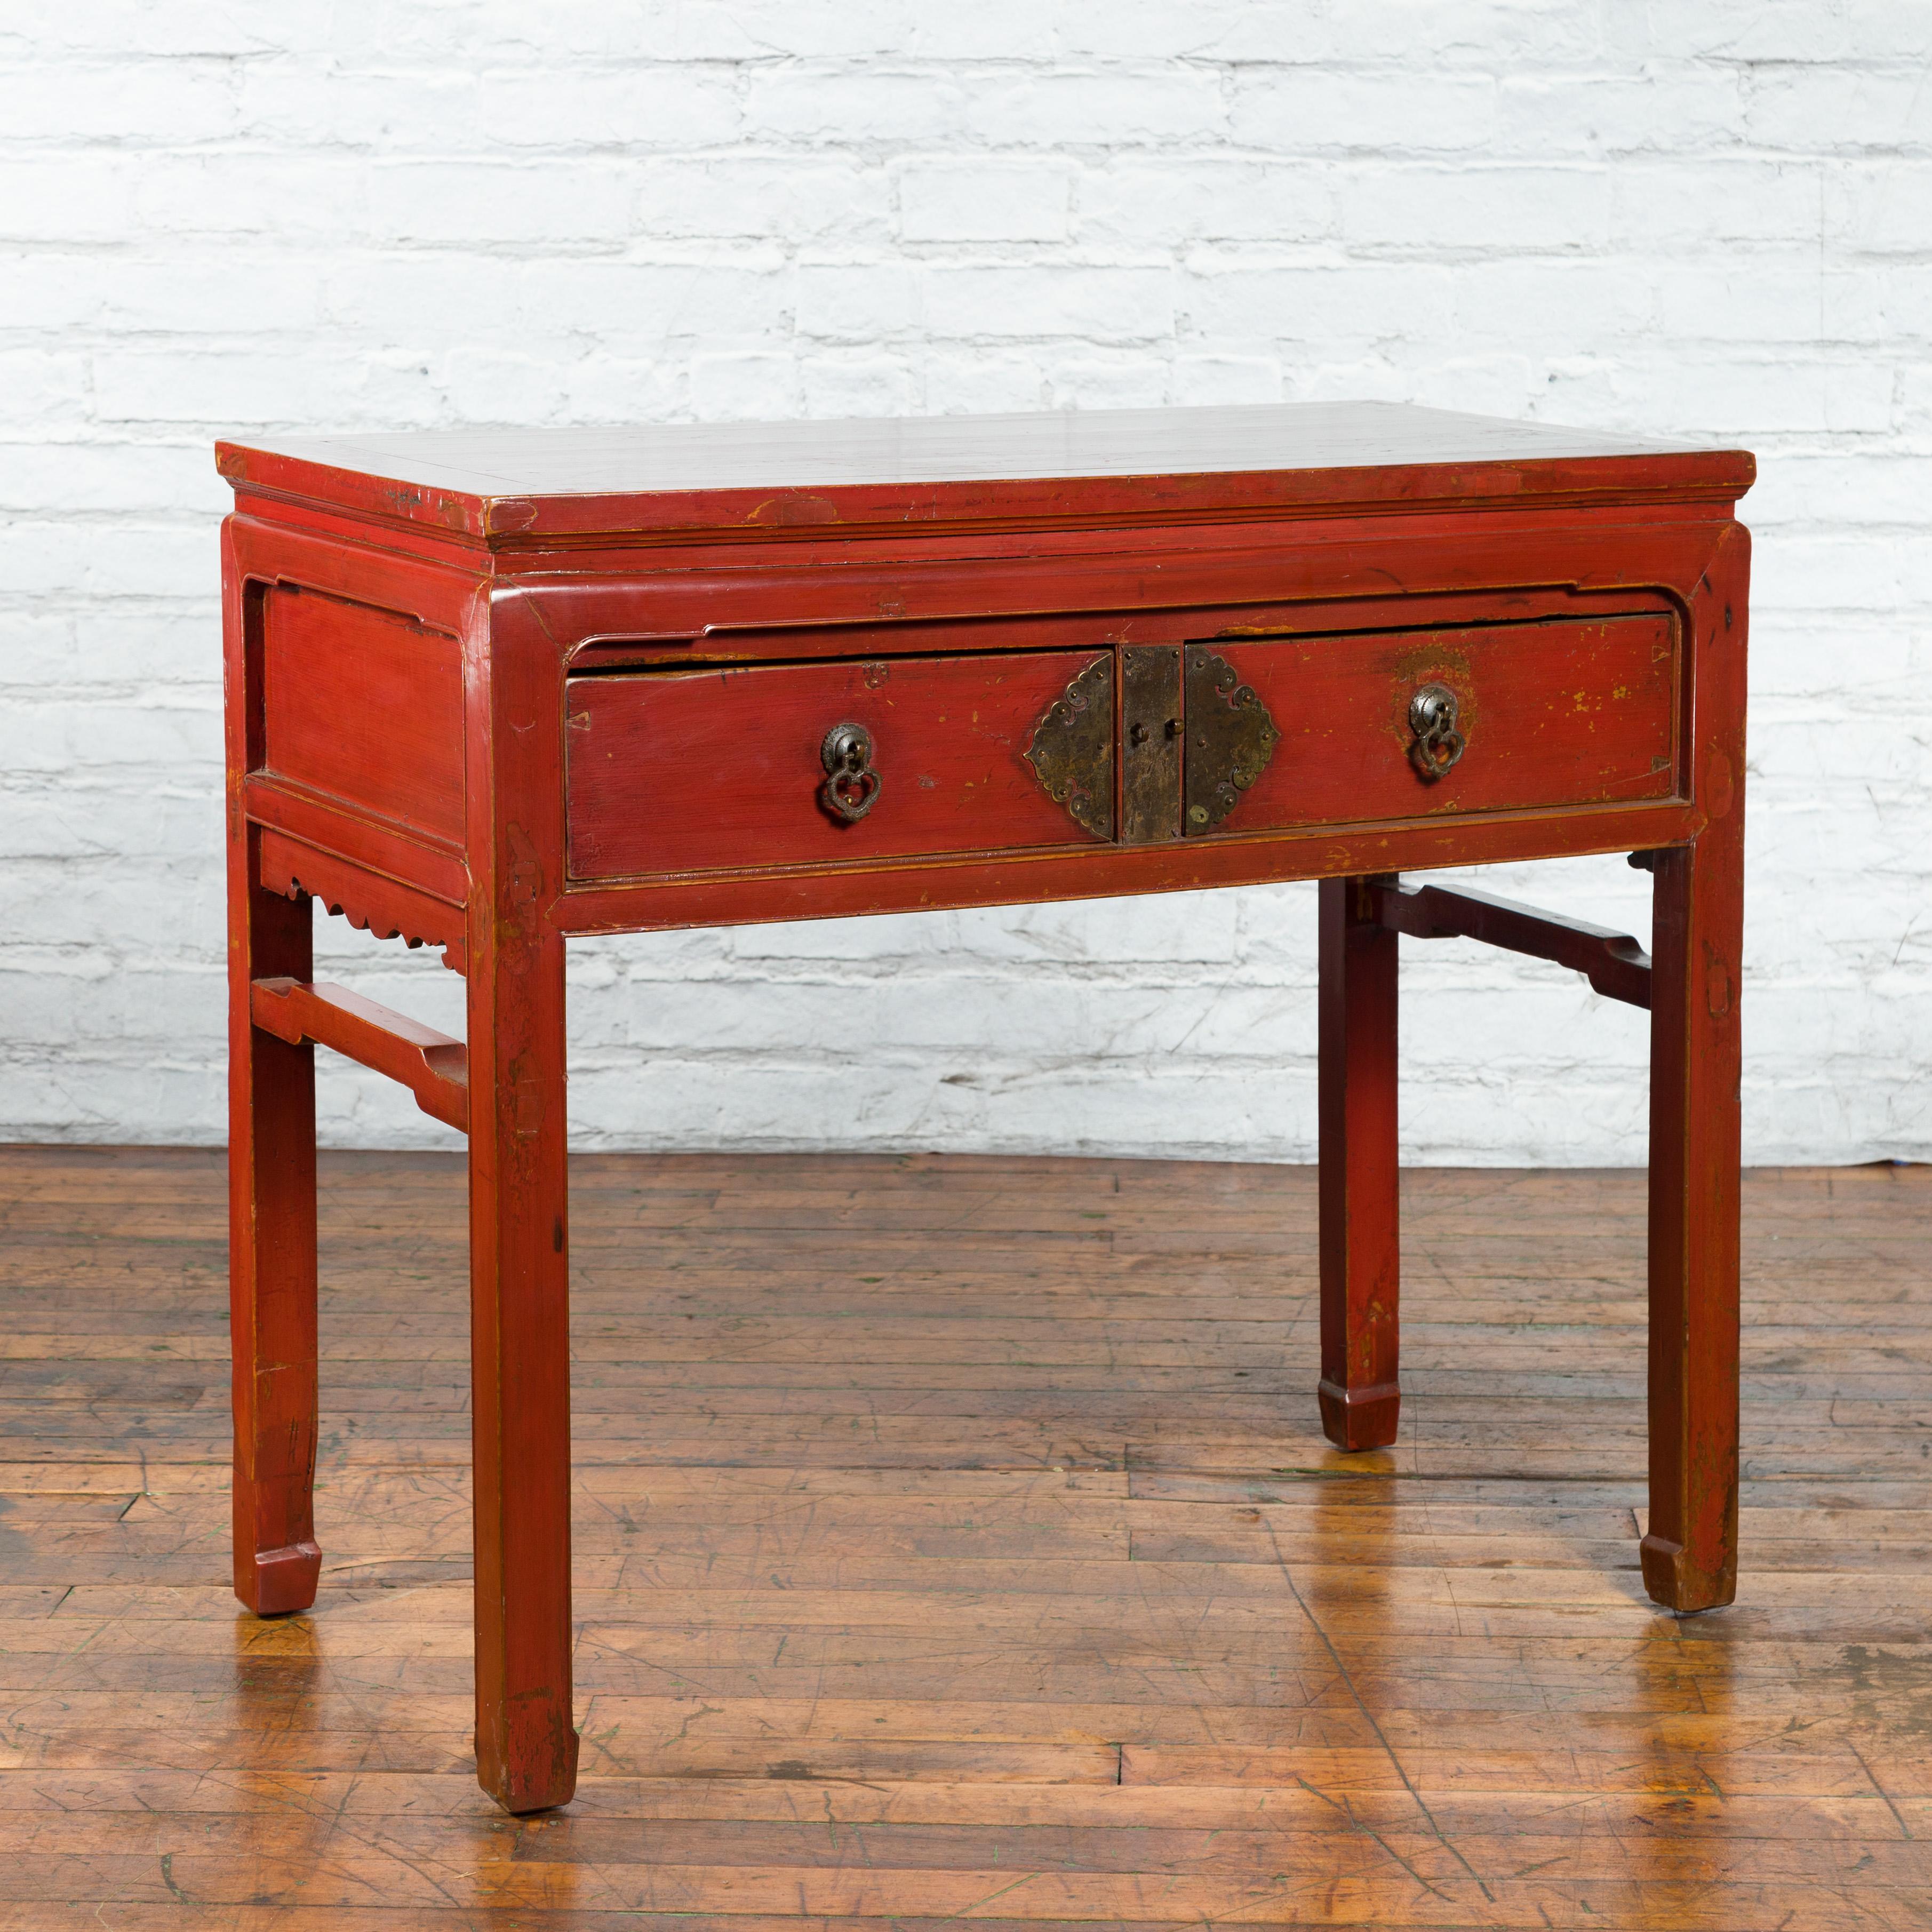 Chinese Red Lacquer Early 20th Century Two Drawer Desk with Brass Hardware In Good Condition For Sale In Yonkers, NY